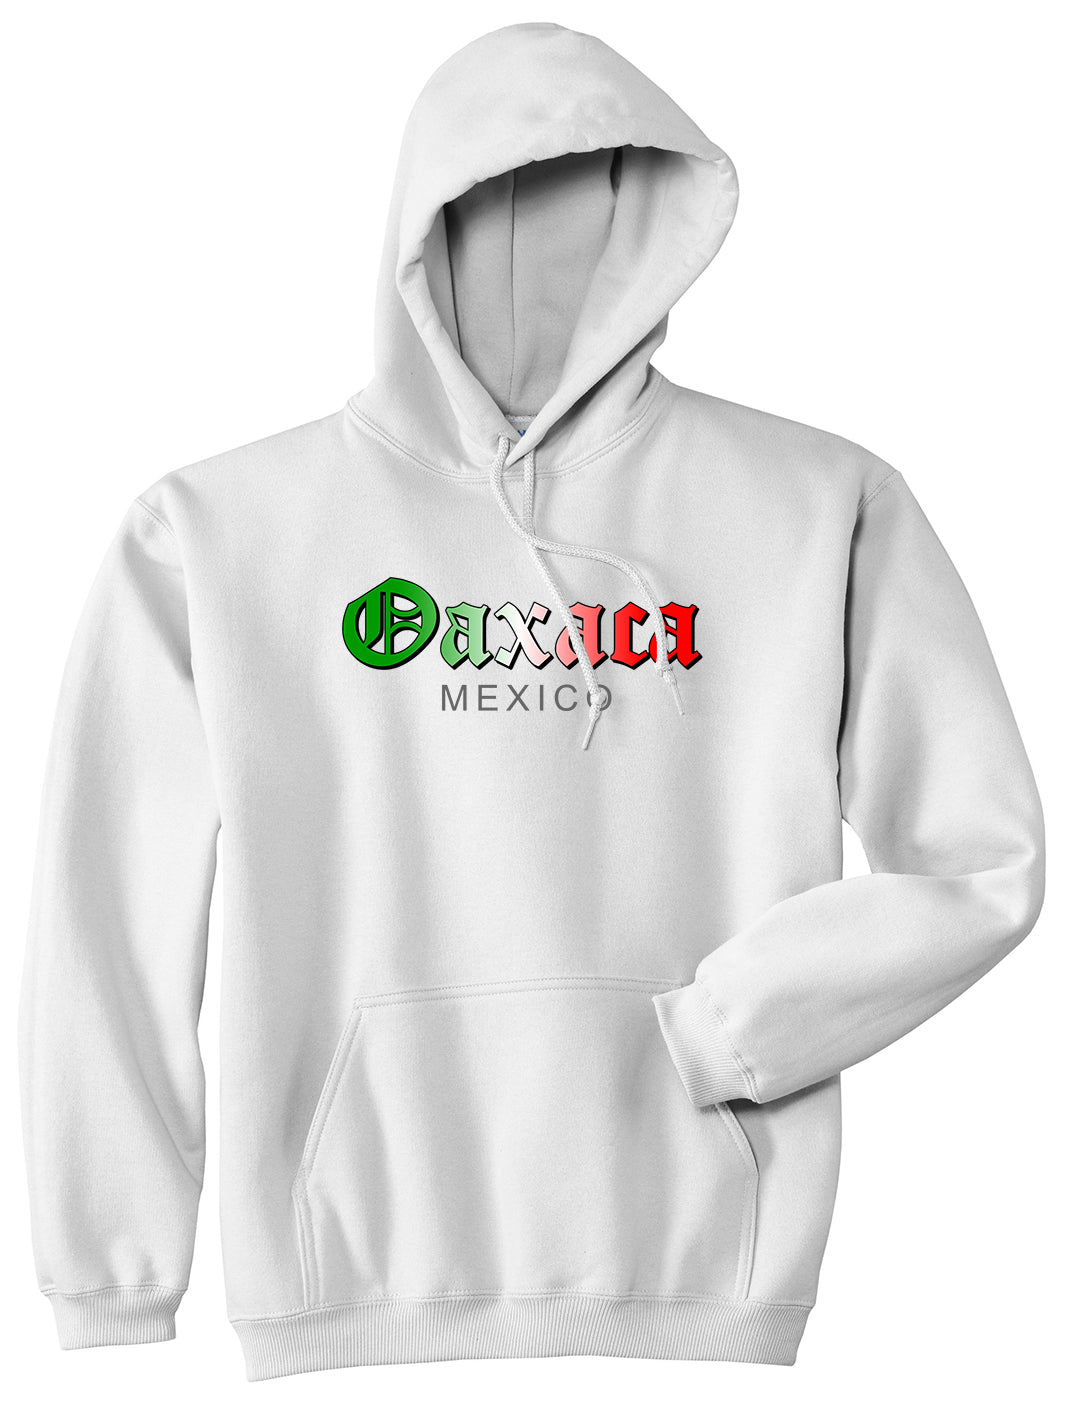 Oaxaca Mexico Mens Pullover Hoodie White